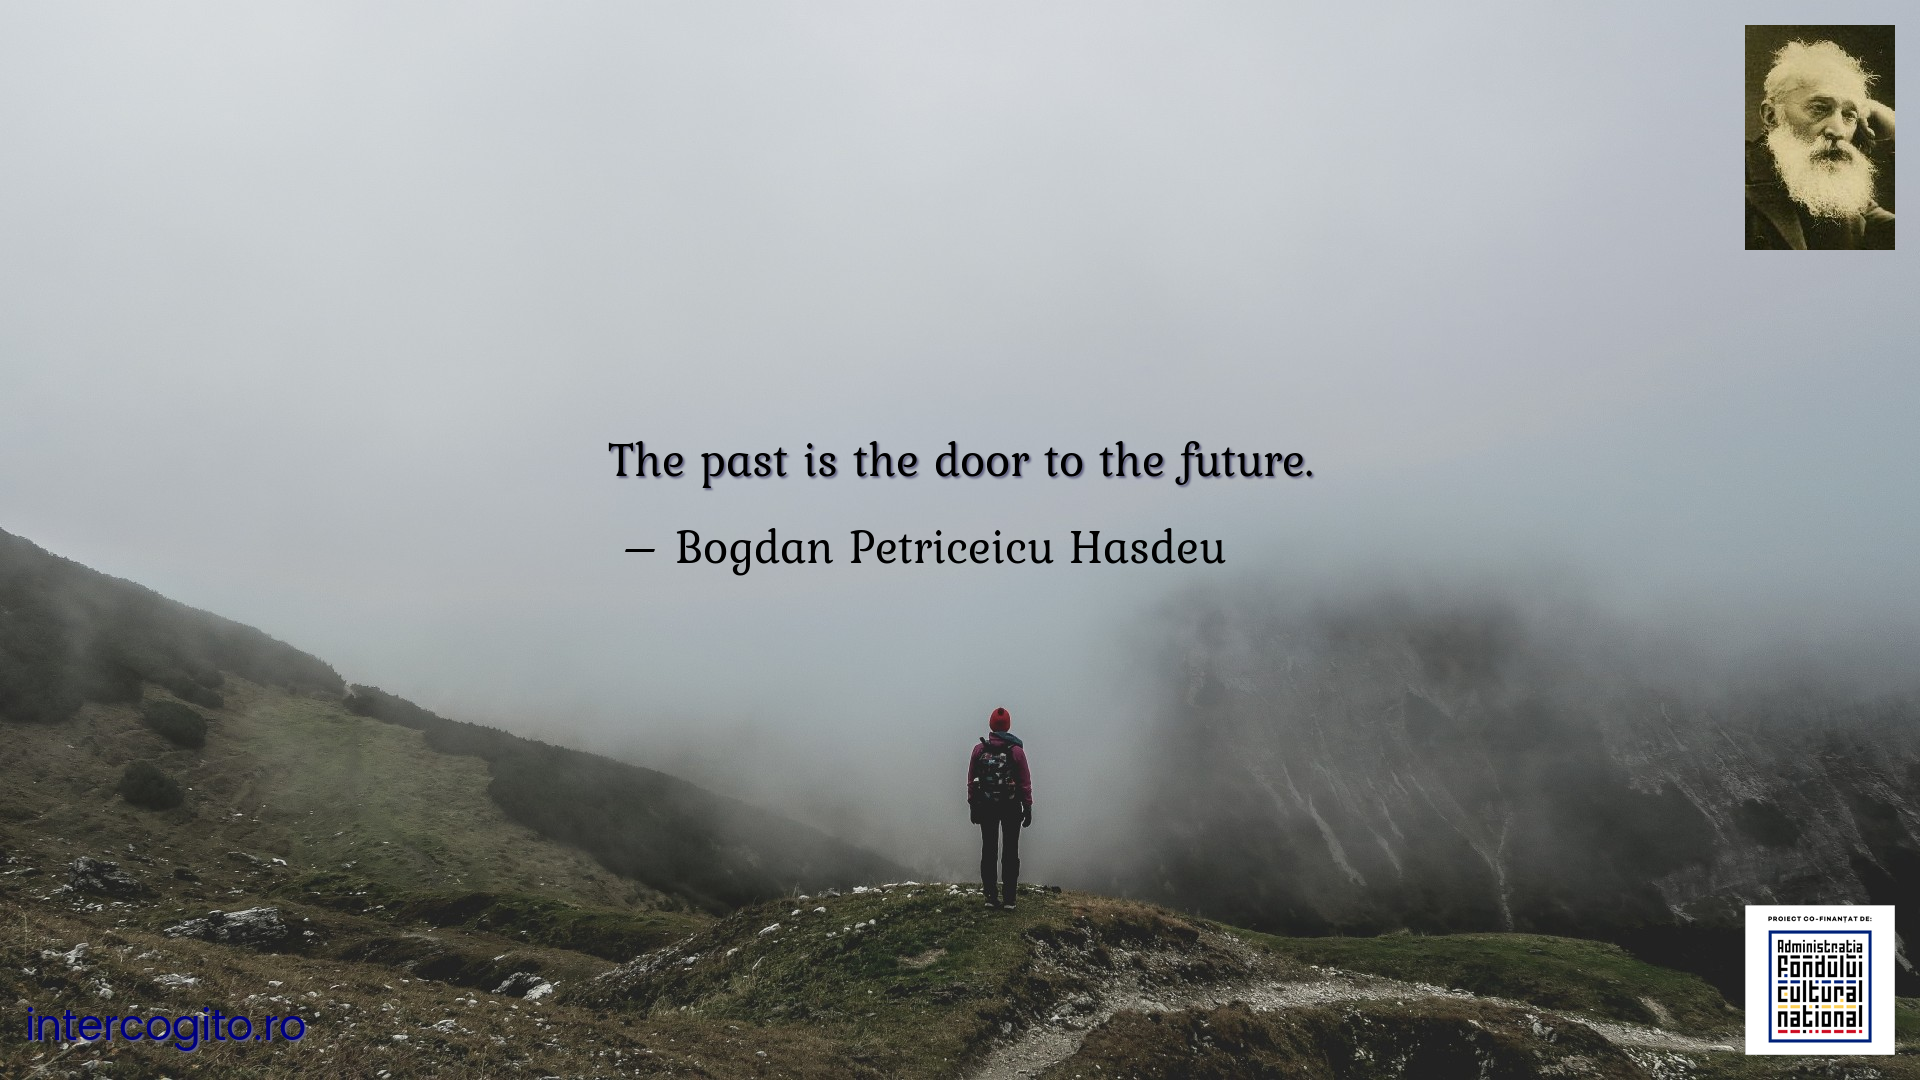 The past is the door to the future.